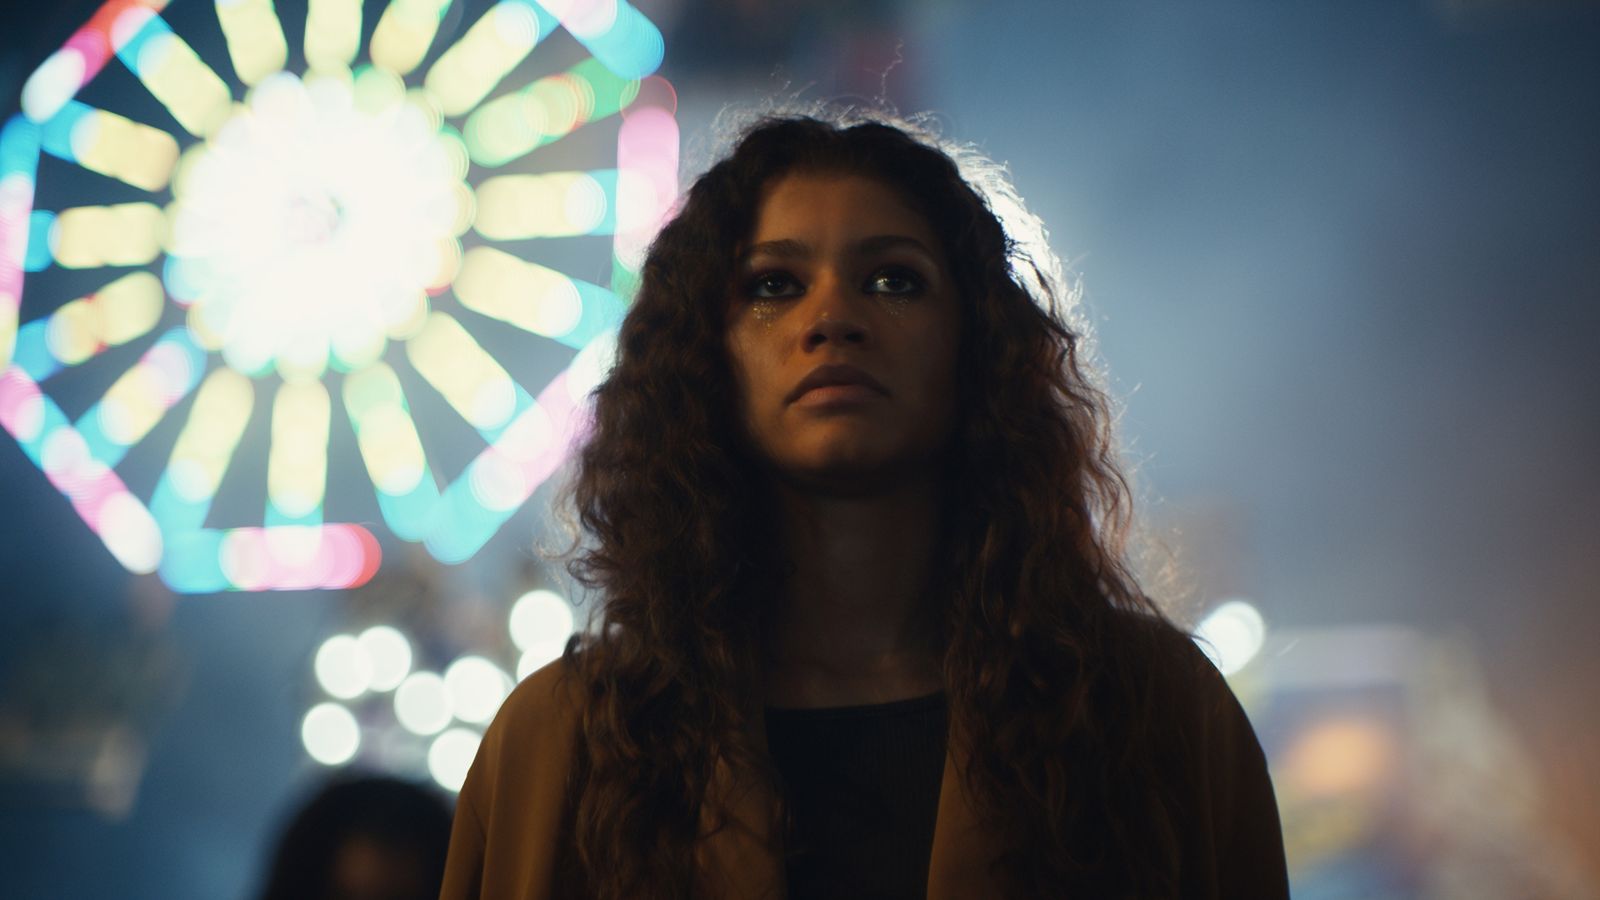 Zendaya says new season of Euphoria could be ‘triggering’ and ‘difficult to watch’ for some people